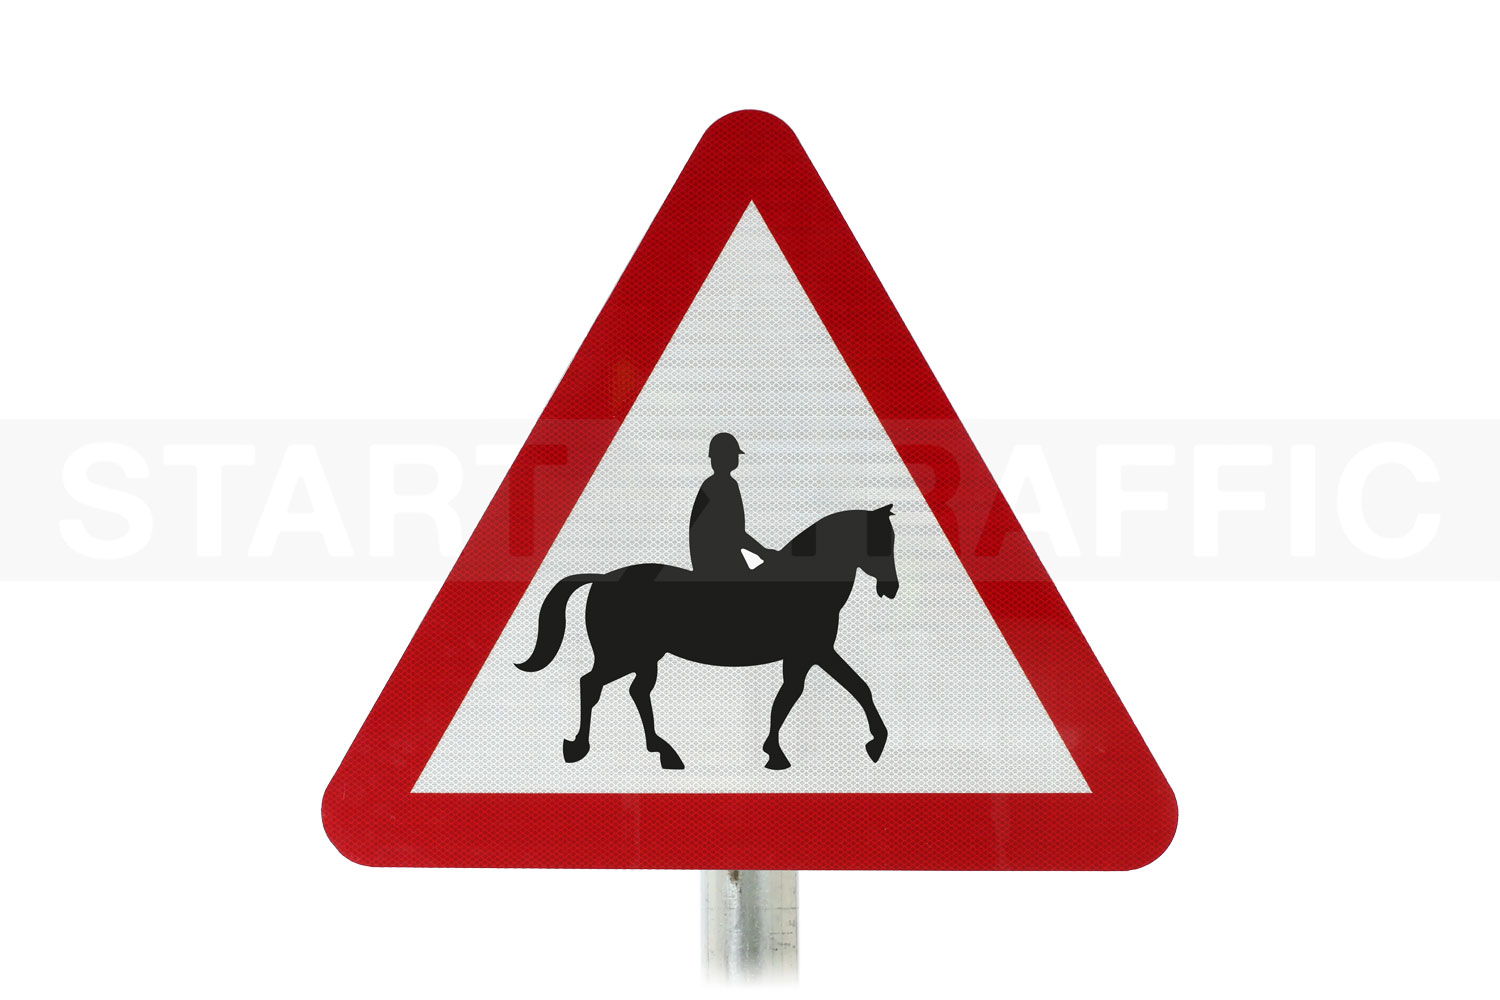 Ridden horses likely in road ahead Post Mount sign